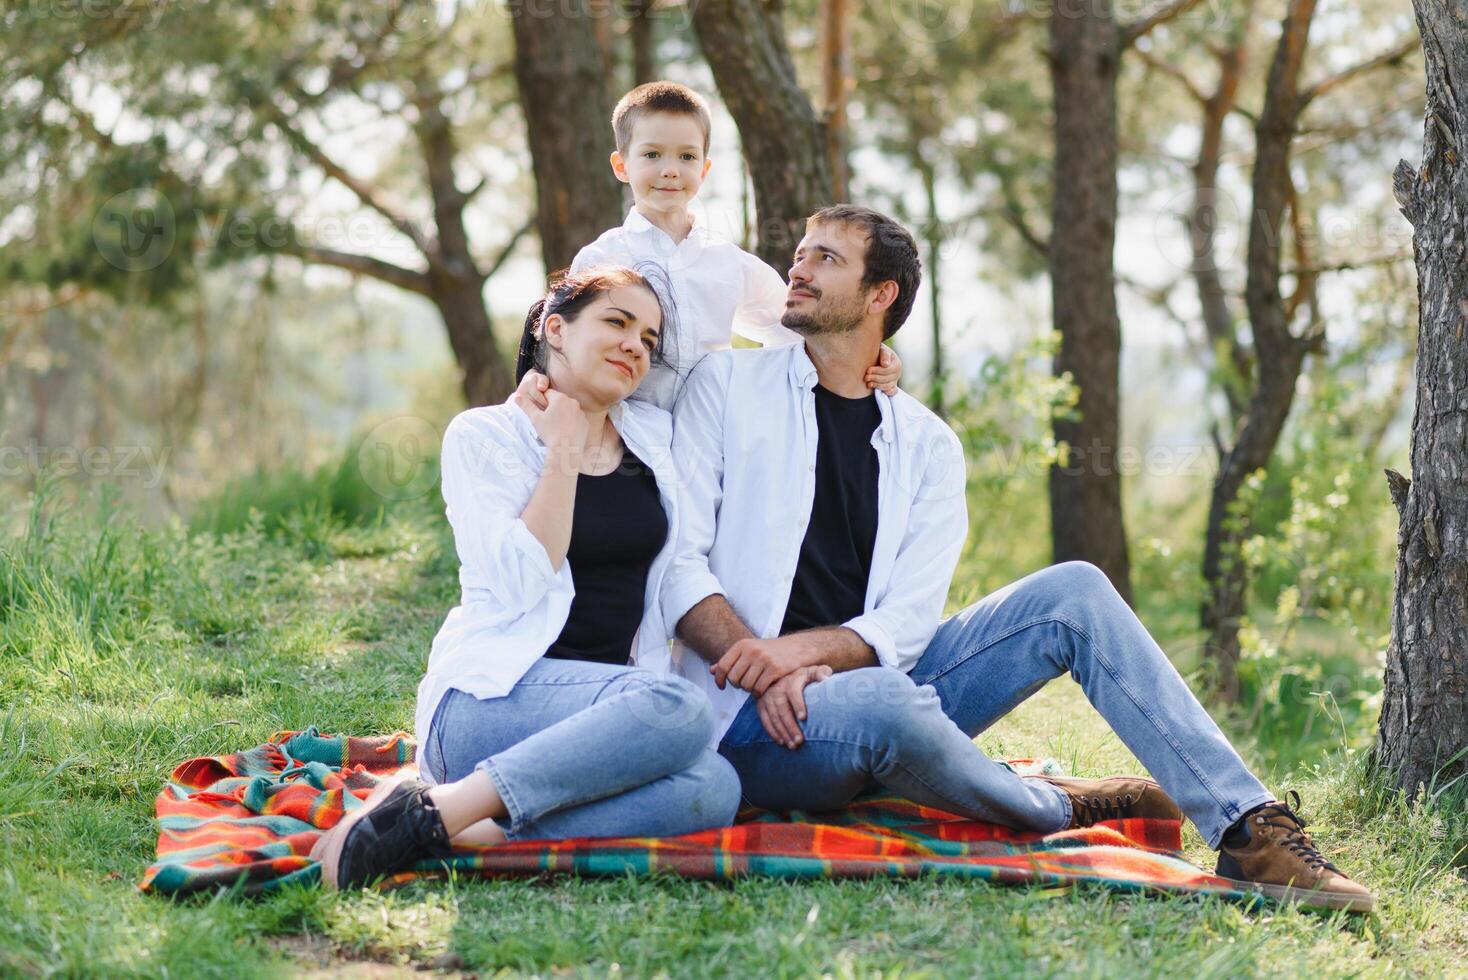 happy young family spending time outdoor on a summer day have fun at beautiful park in nature while sitting on the green grass. Happy family. photo